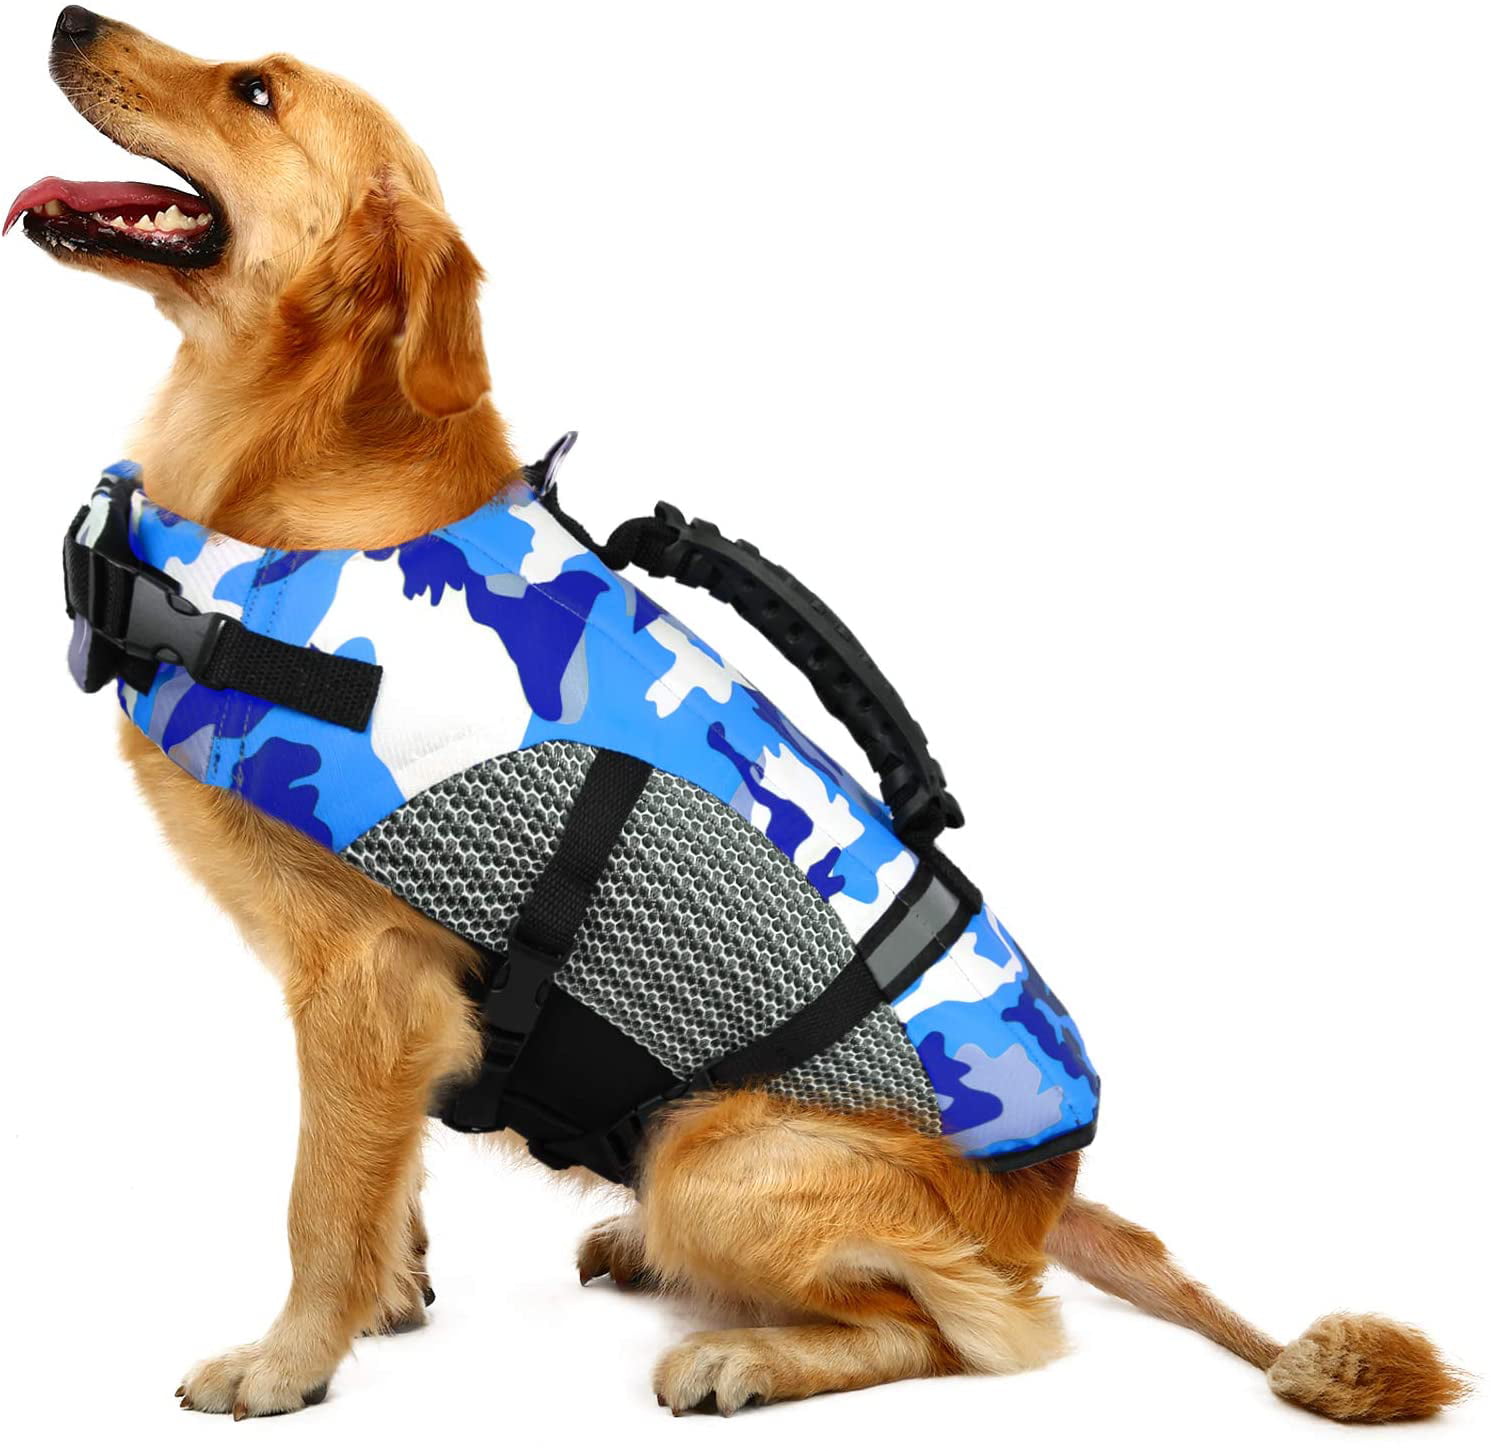 Pet Dog Life Vest,Dog Life Jacket Safety Water Coat,Doggy Swimsuit Lifesaver Preserver for Boating Pool Beach,Puppy Swimming Lifejacket with High Buoyancy&Rescue Handle,Dog Sport Flotation Harness